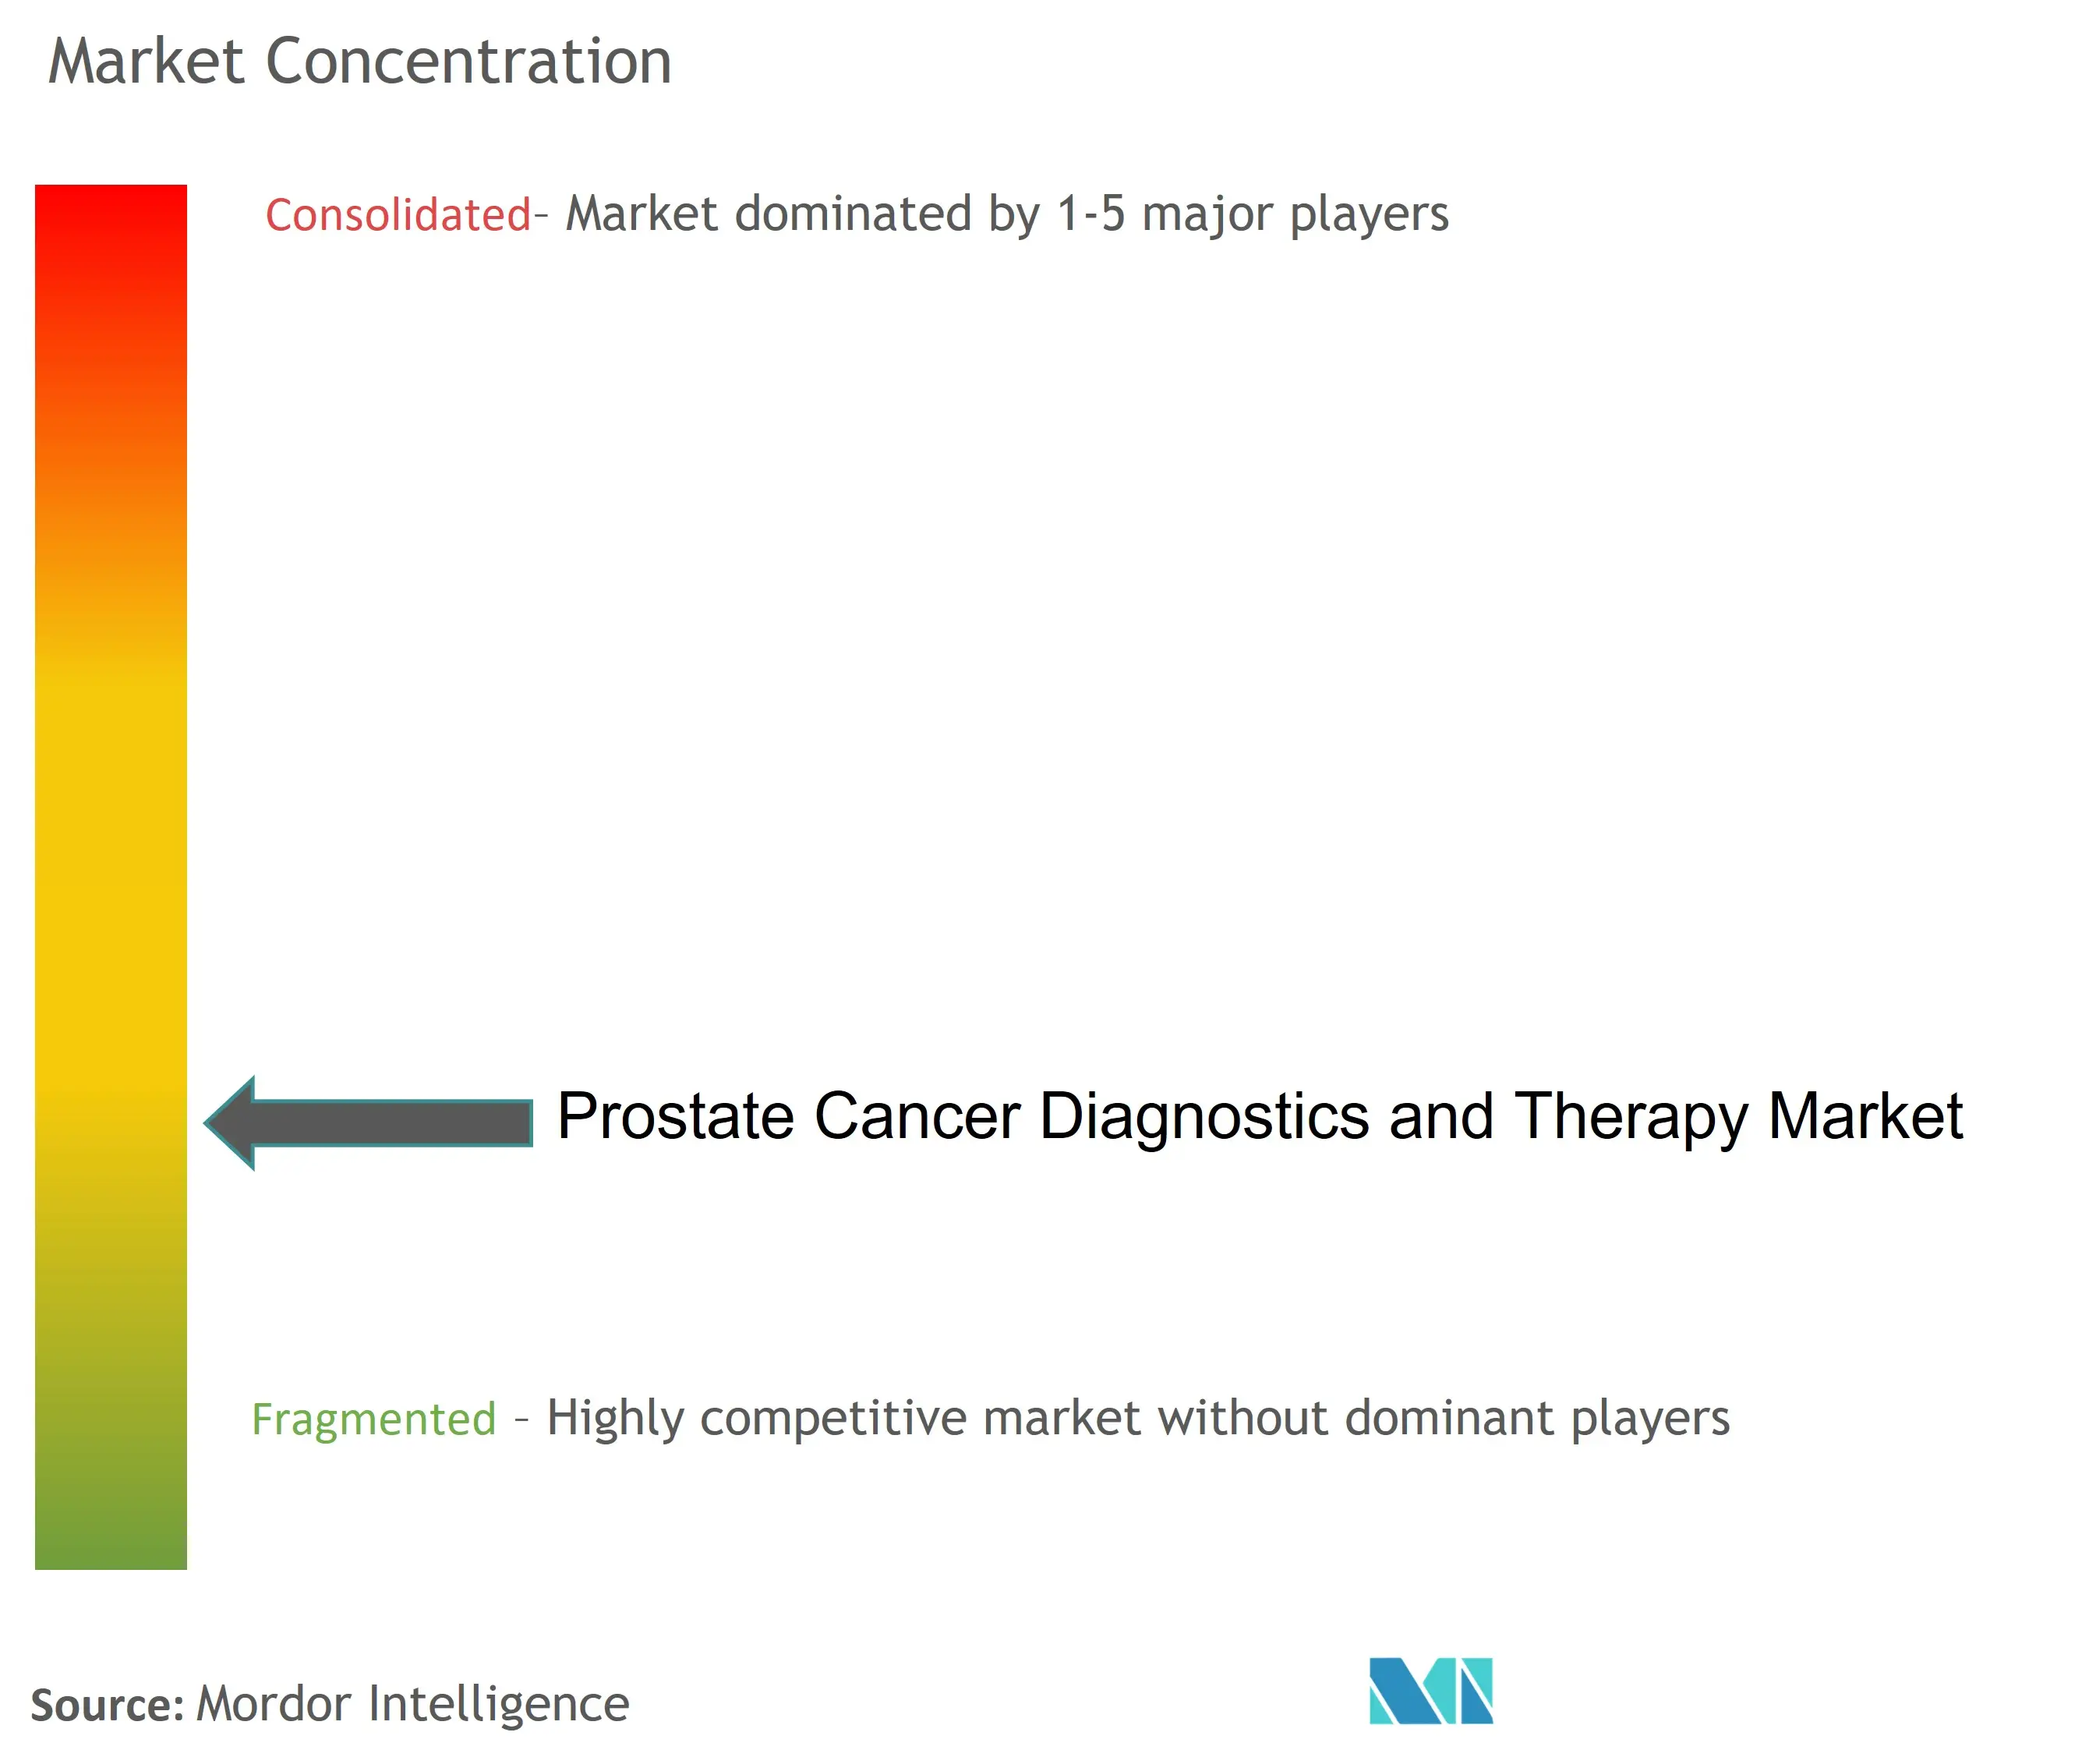 Prostate Cancer Diagnostics and Therapy Market Concentration